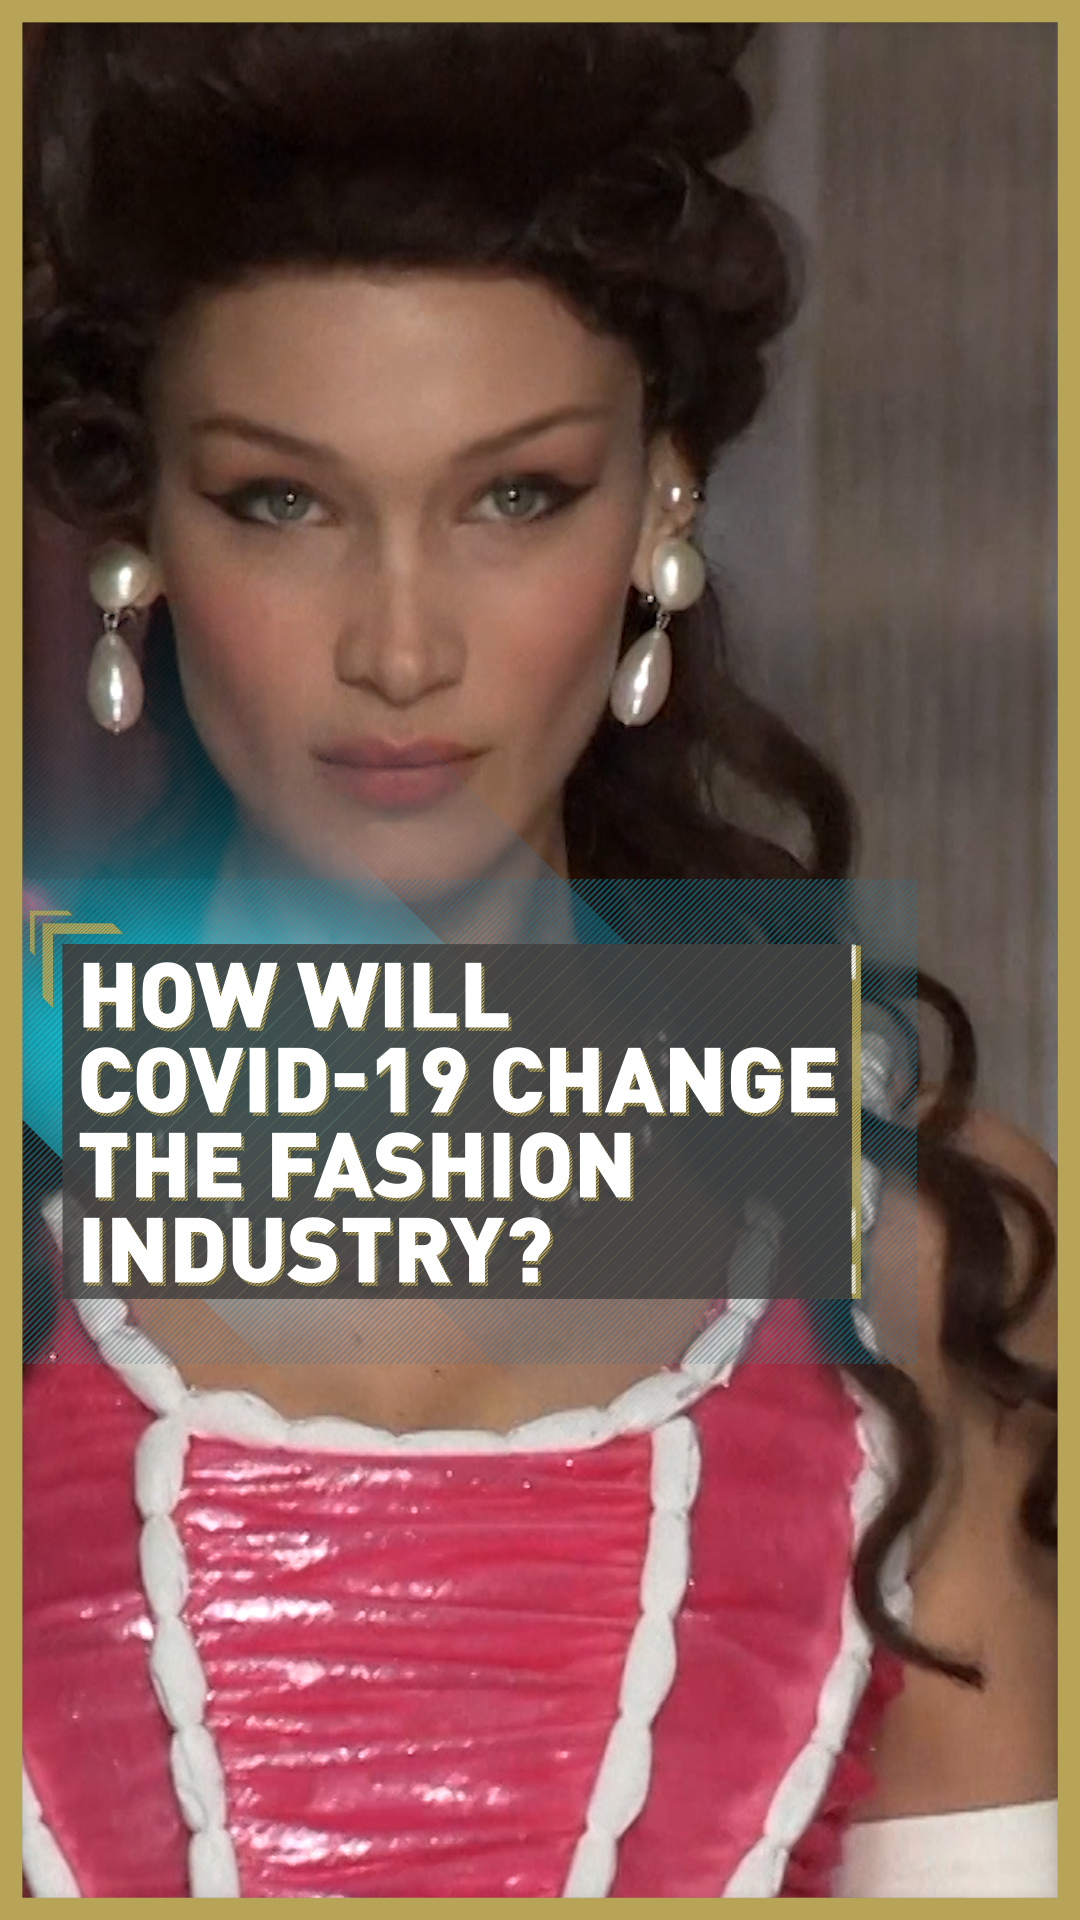 How will COVID-19 change the fashion industry? - CGTN